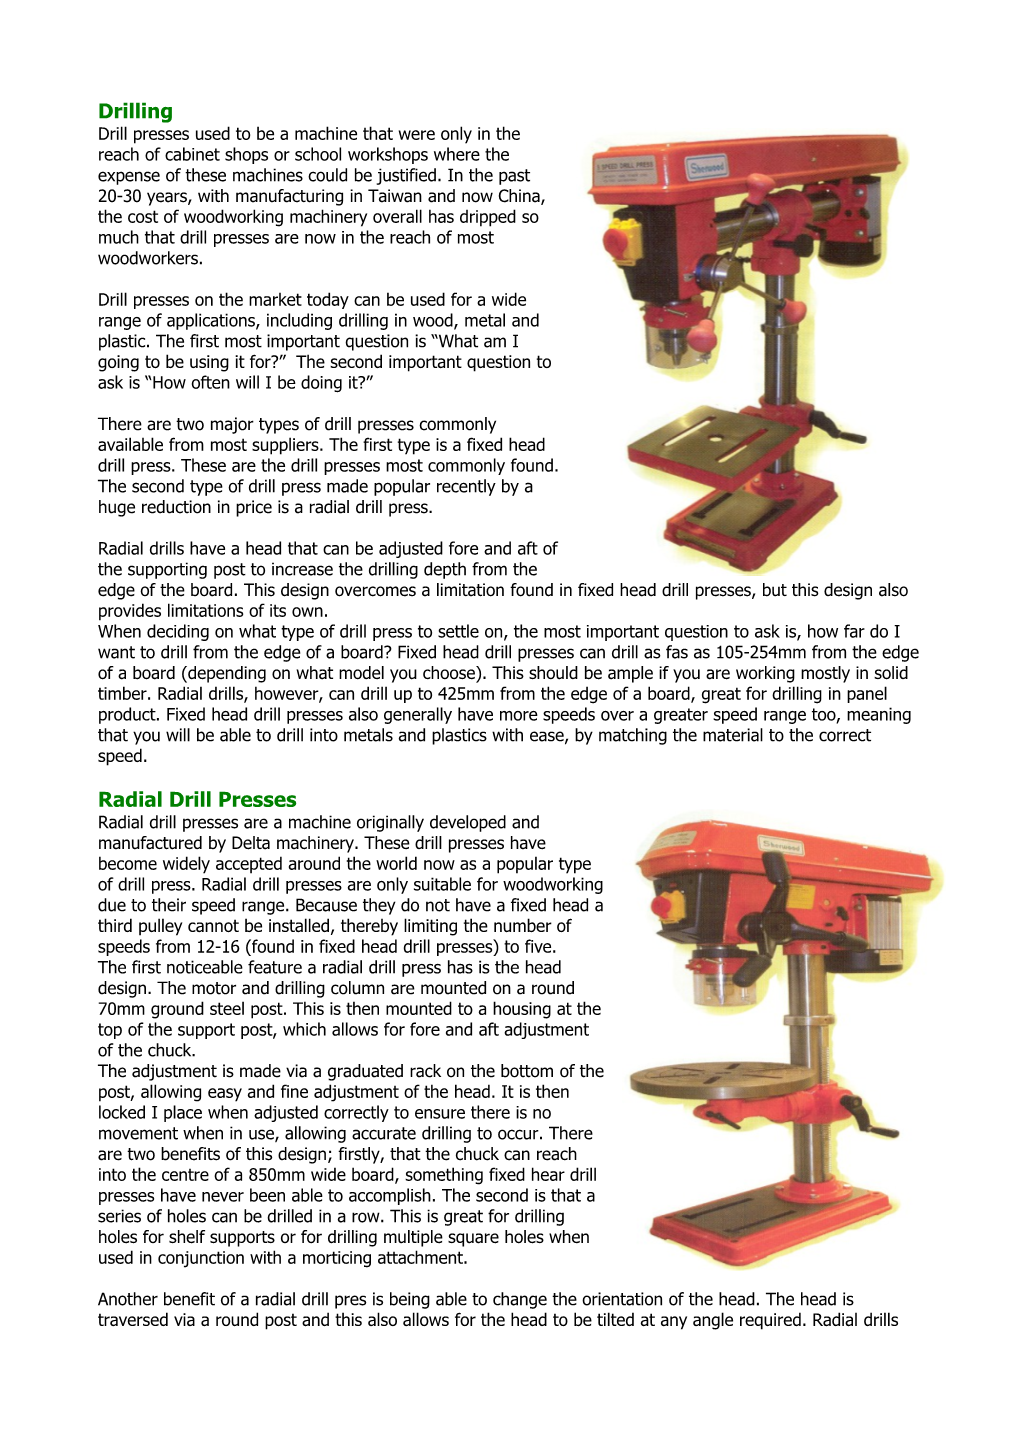 Drill Presses Used to Be a Machine That Were Only in the Reach of Cabinet Shops Or School